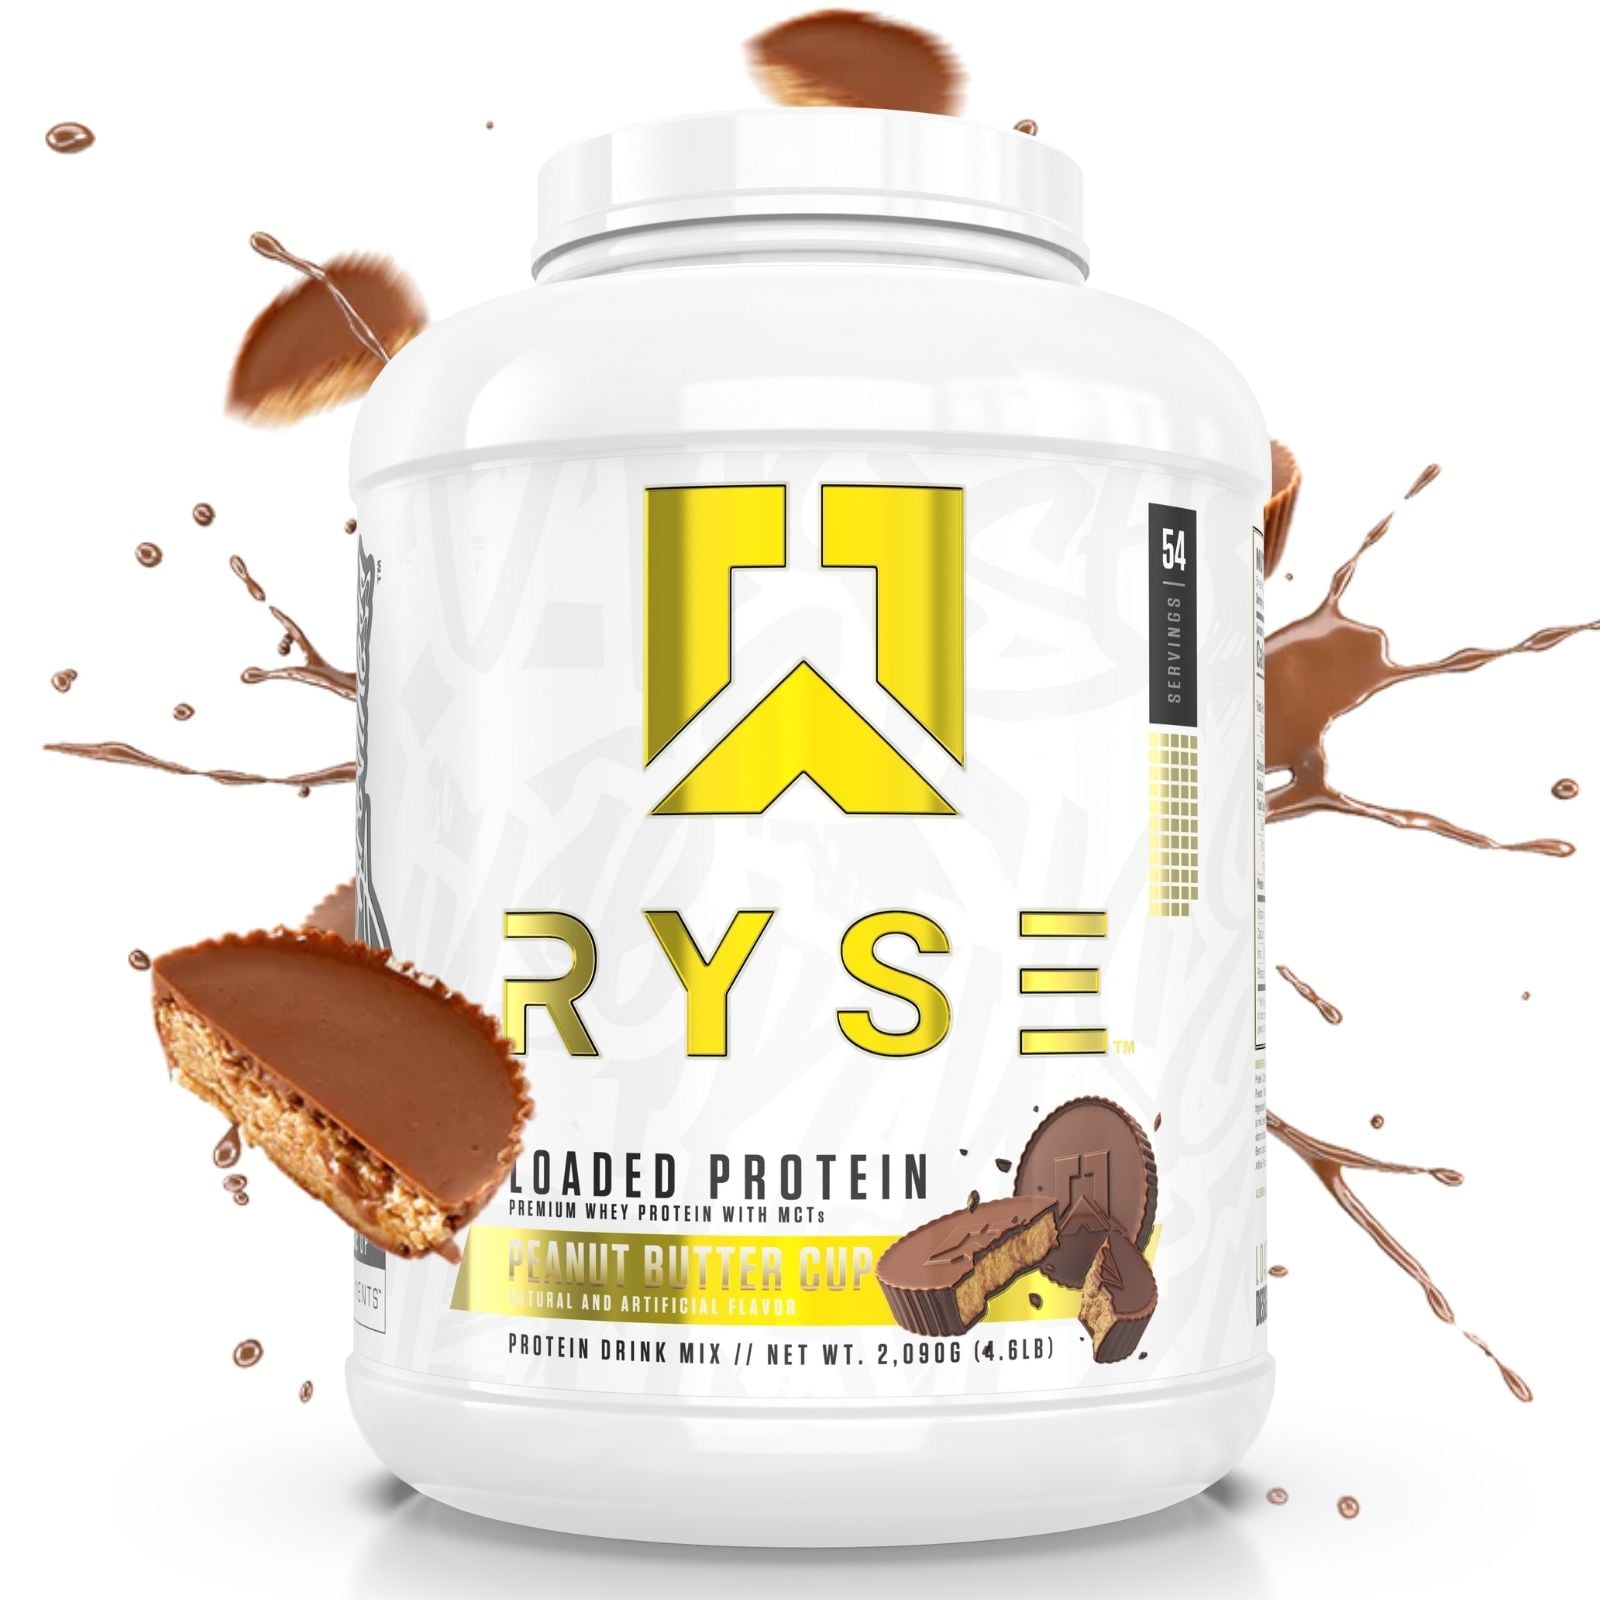 Loaded Premium Whey Protein with MCTs - Chocolate Cookie Blast (2.3 Lbs. /  27 Servings) by Ryse at the Vitamin Shoppe